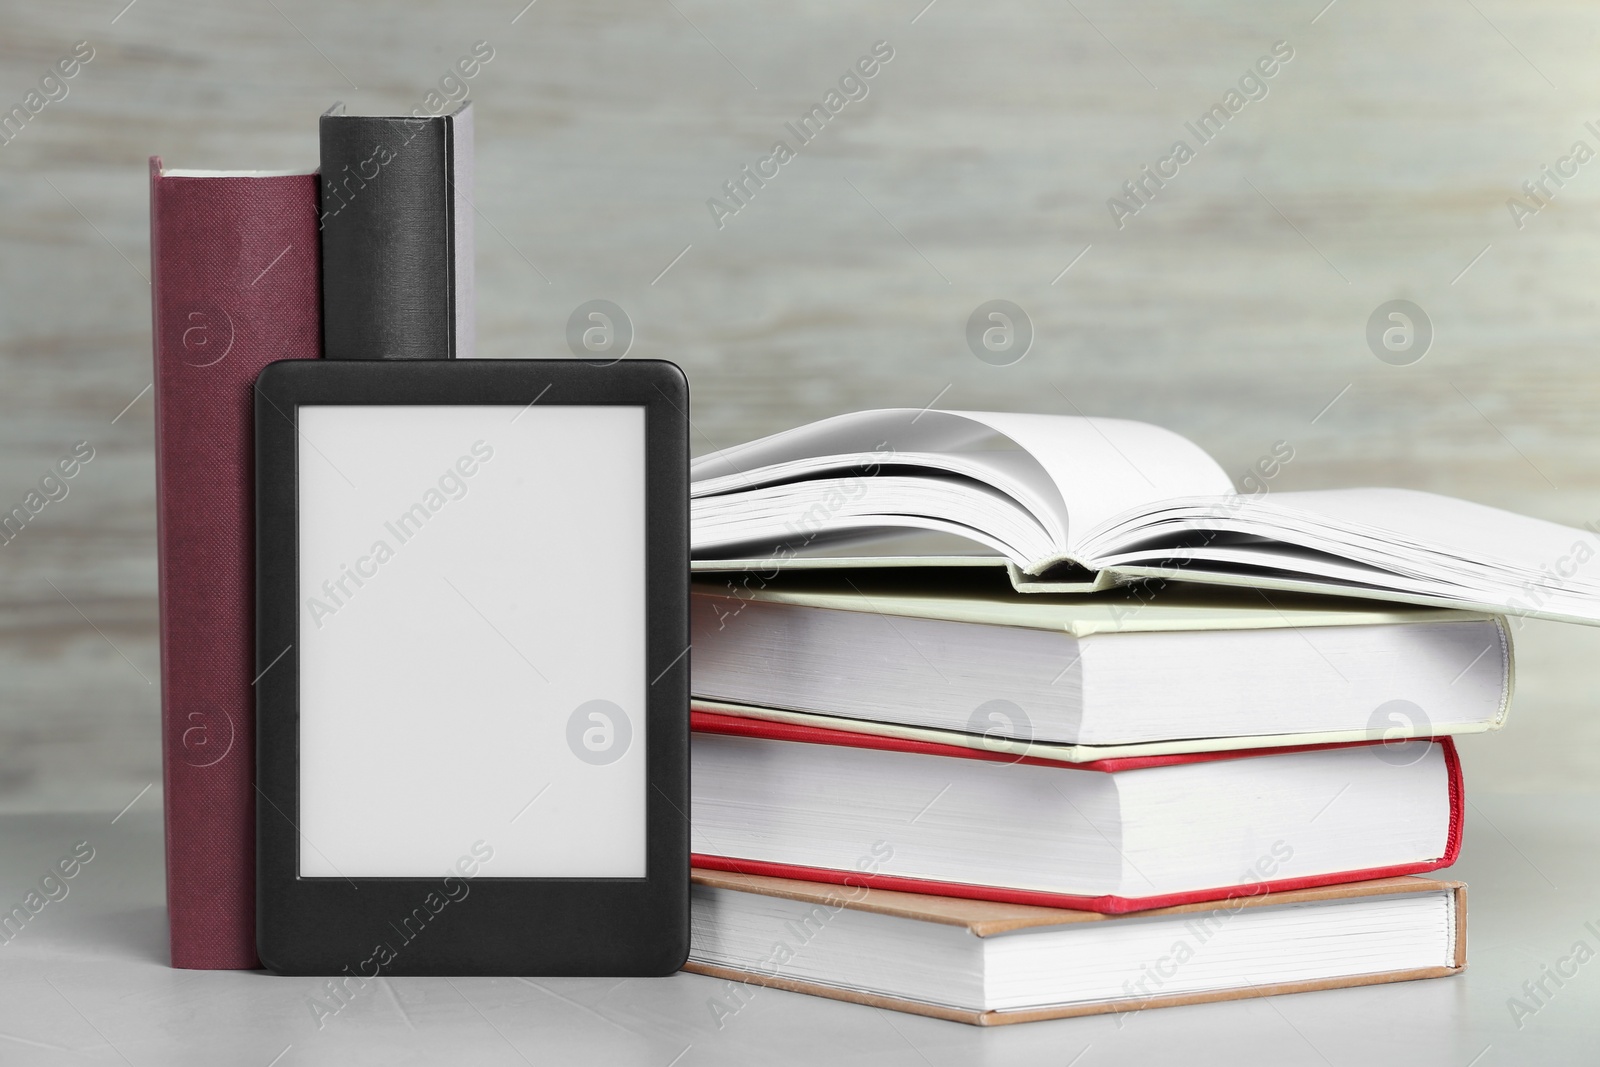 Photo of Portable e-book reader and many hardcover books on white textured table